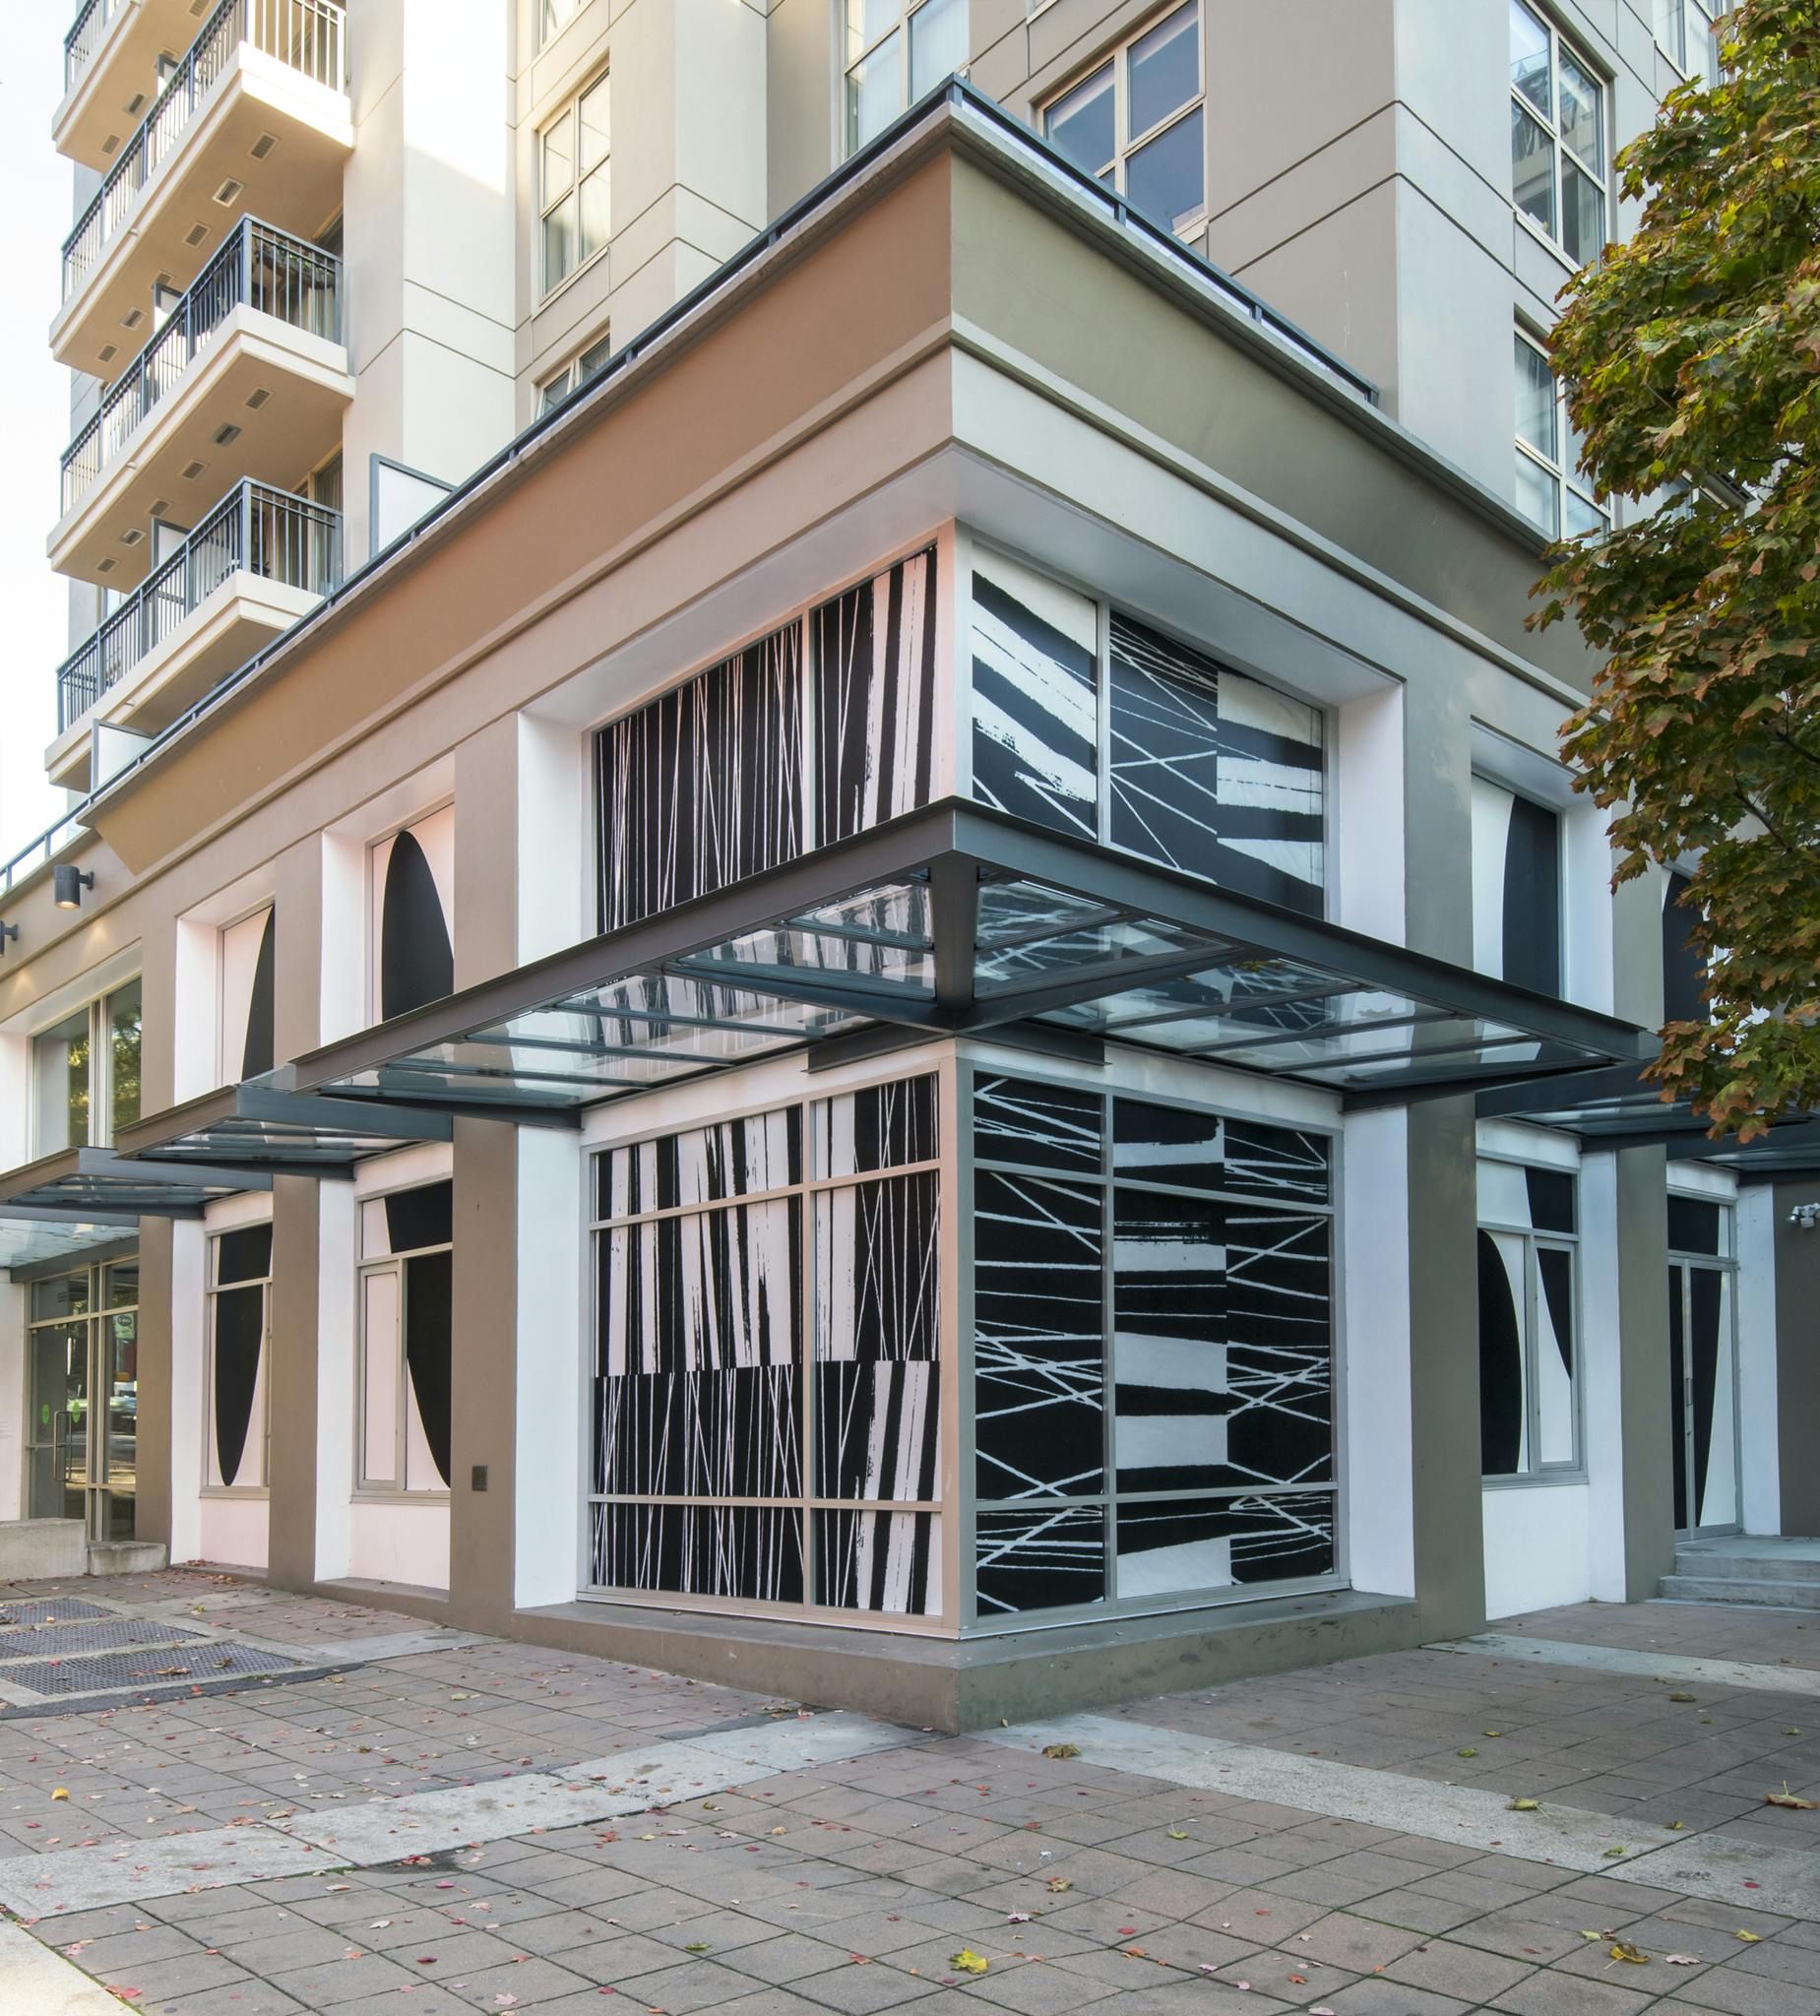 Exterior image of CAG with the work of Lyse Lemieux installed in vinyl across the ground and top floor windows. Large-scale black ellipses alternate with black linear patterns on a beige background.